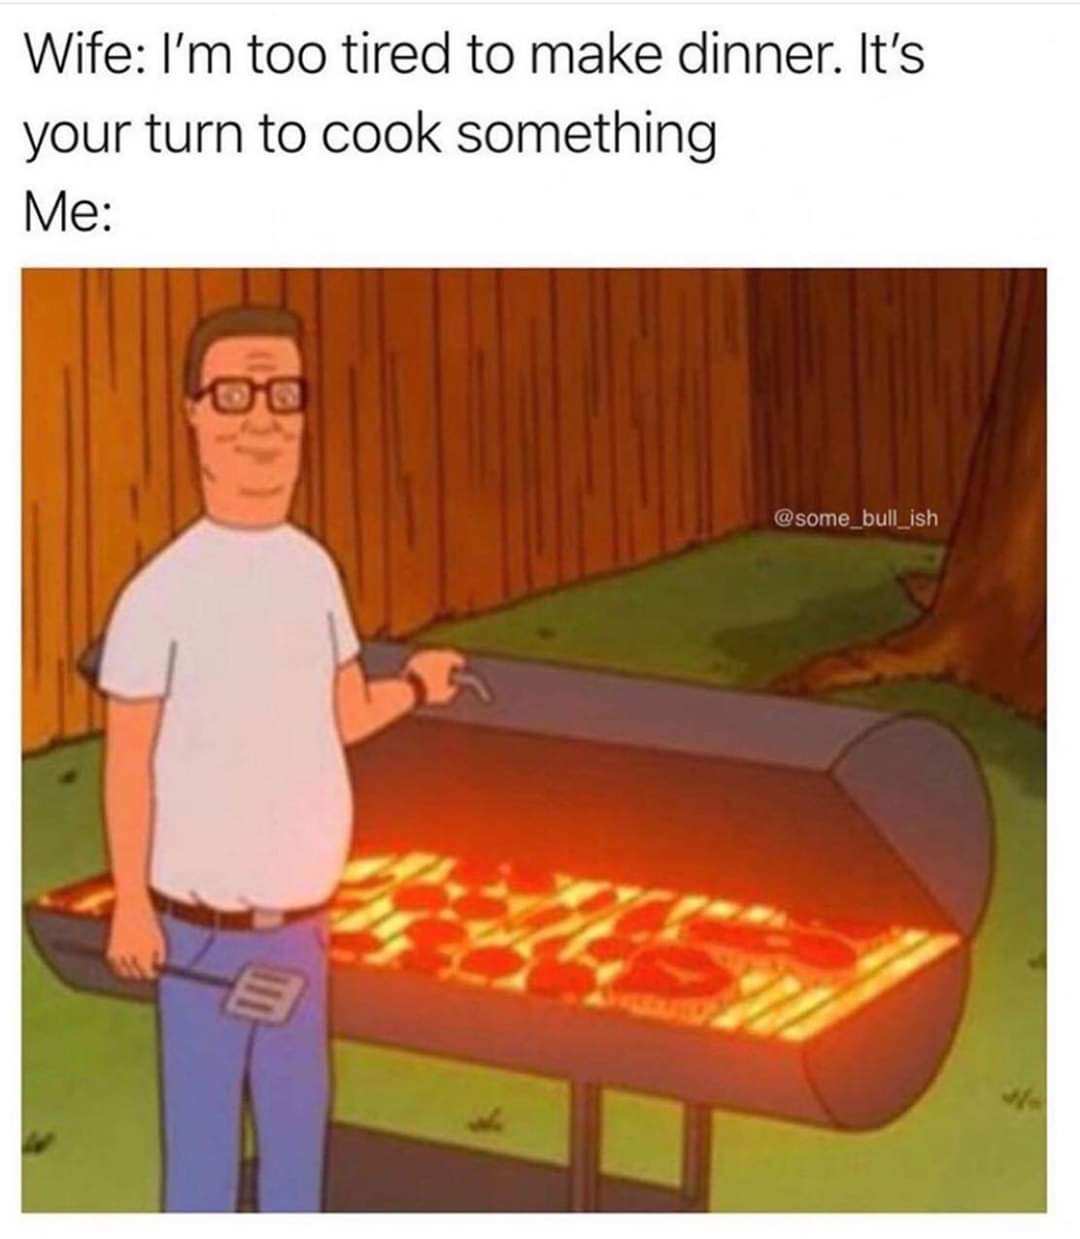 hank hill grilling - Wife I'm too tired to make dinner. It's your turn to cook something Me